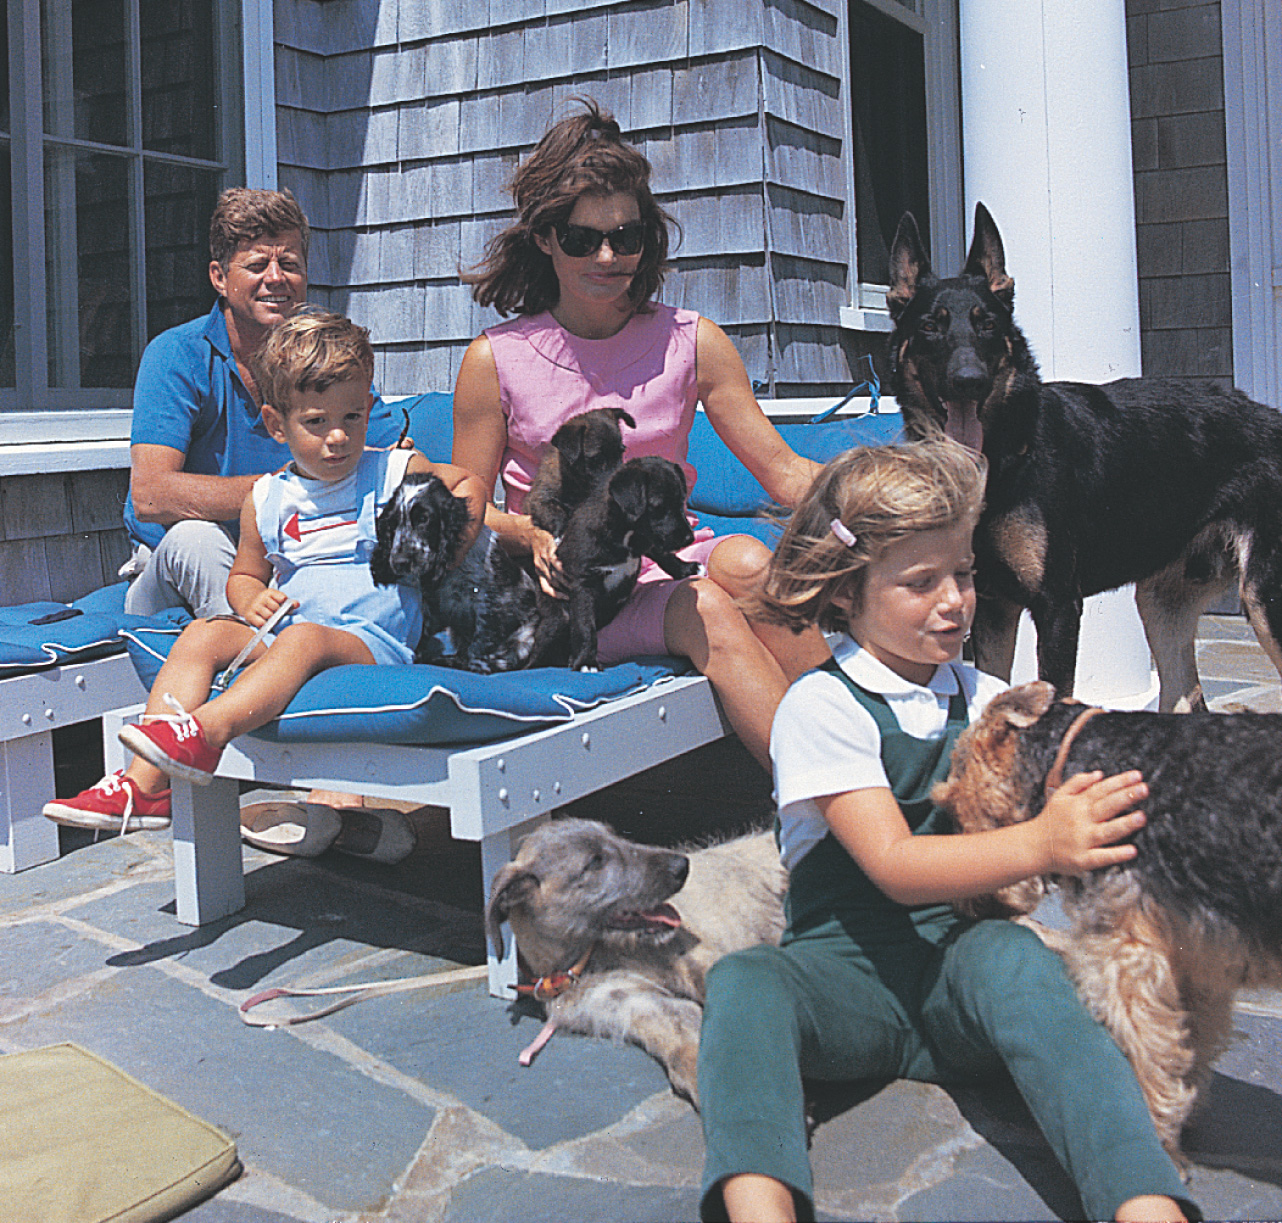 Photo: Kennedy and his wife
sit on deck chairs with their young son and daughter, petting a half-dozen dogs.